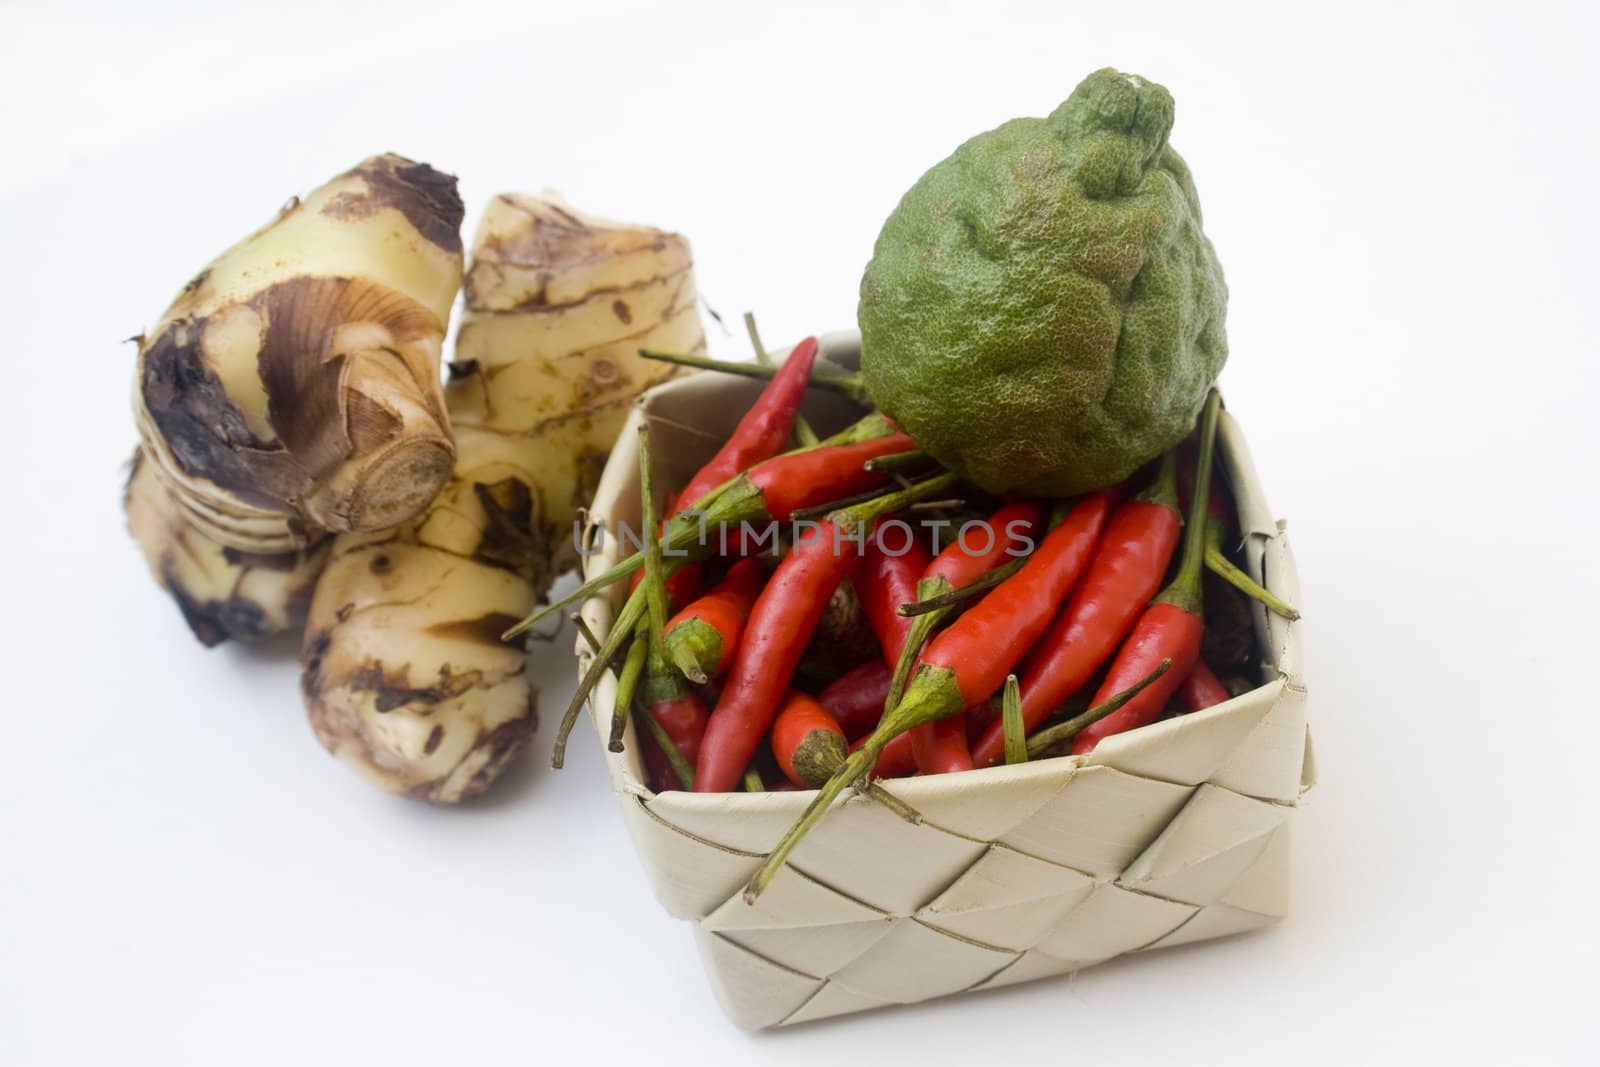 Basket of small chili peppers, galangal root, and a kaffir lime isolated against white